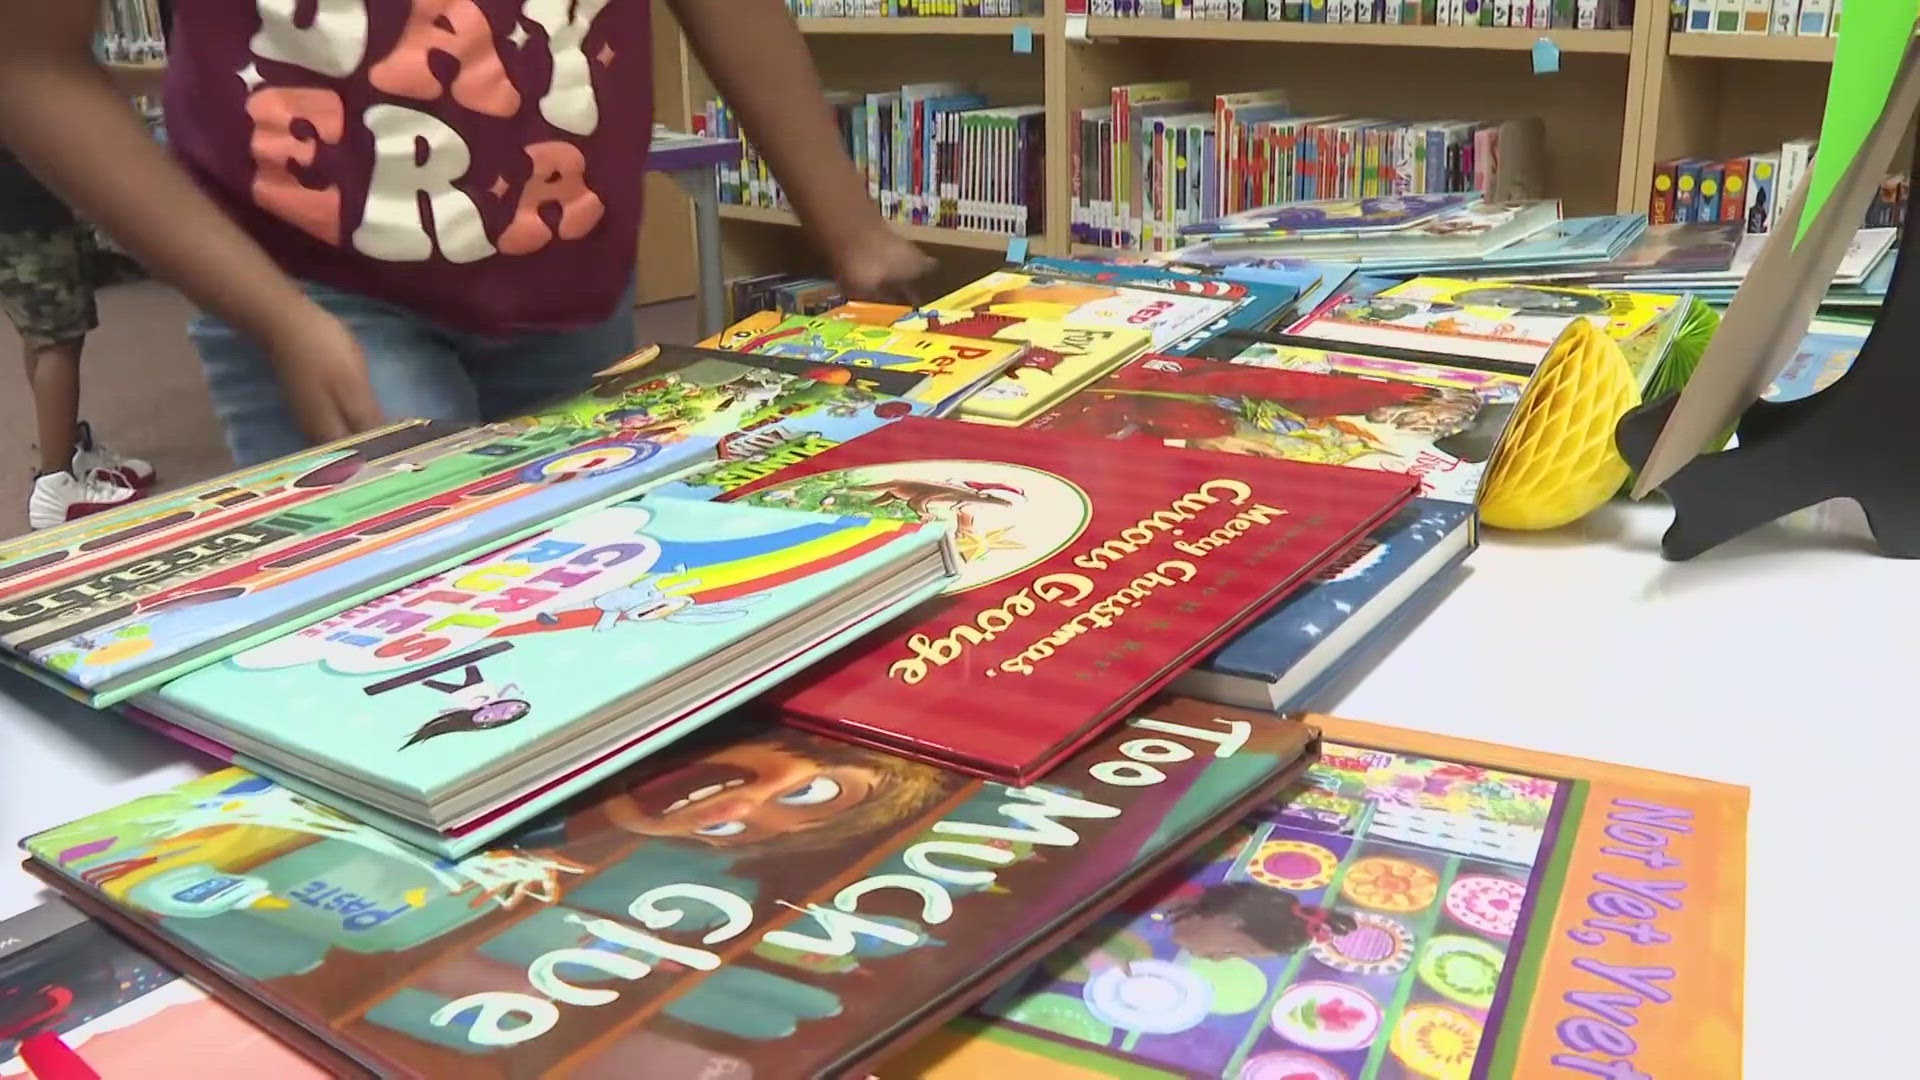 The initiative, a collaboration between Transformation Waco, Literacy ConneXus, and 6 News, aims to foster literacy among local youth during the summer break.